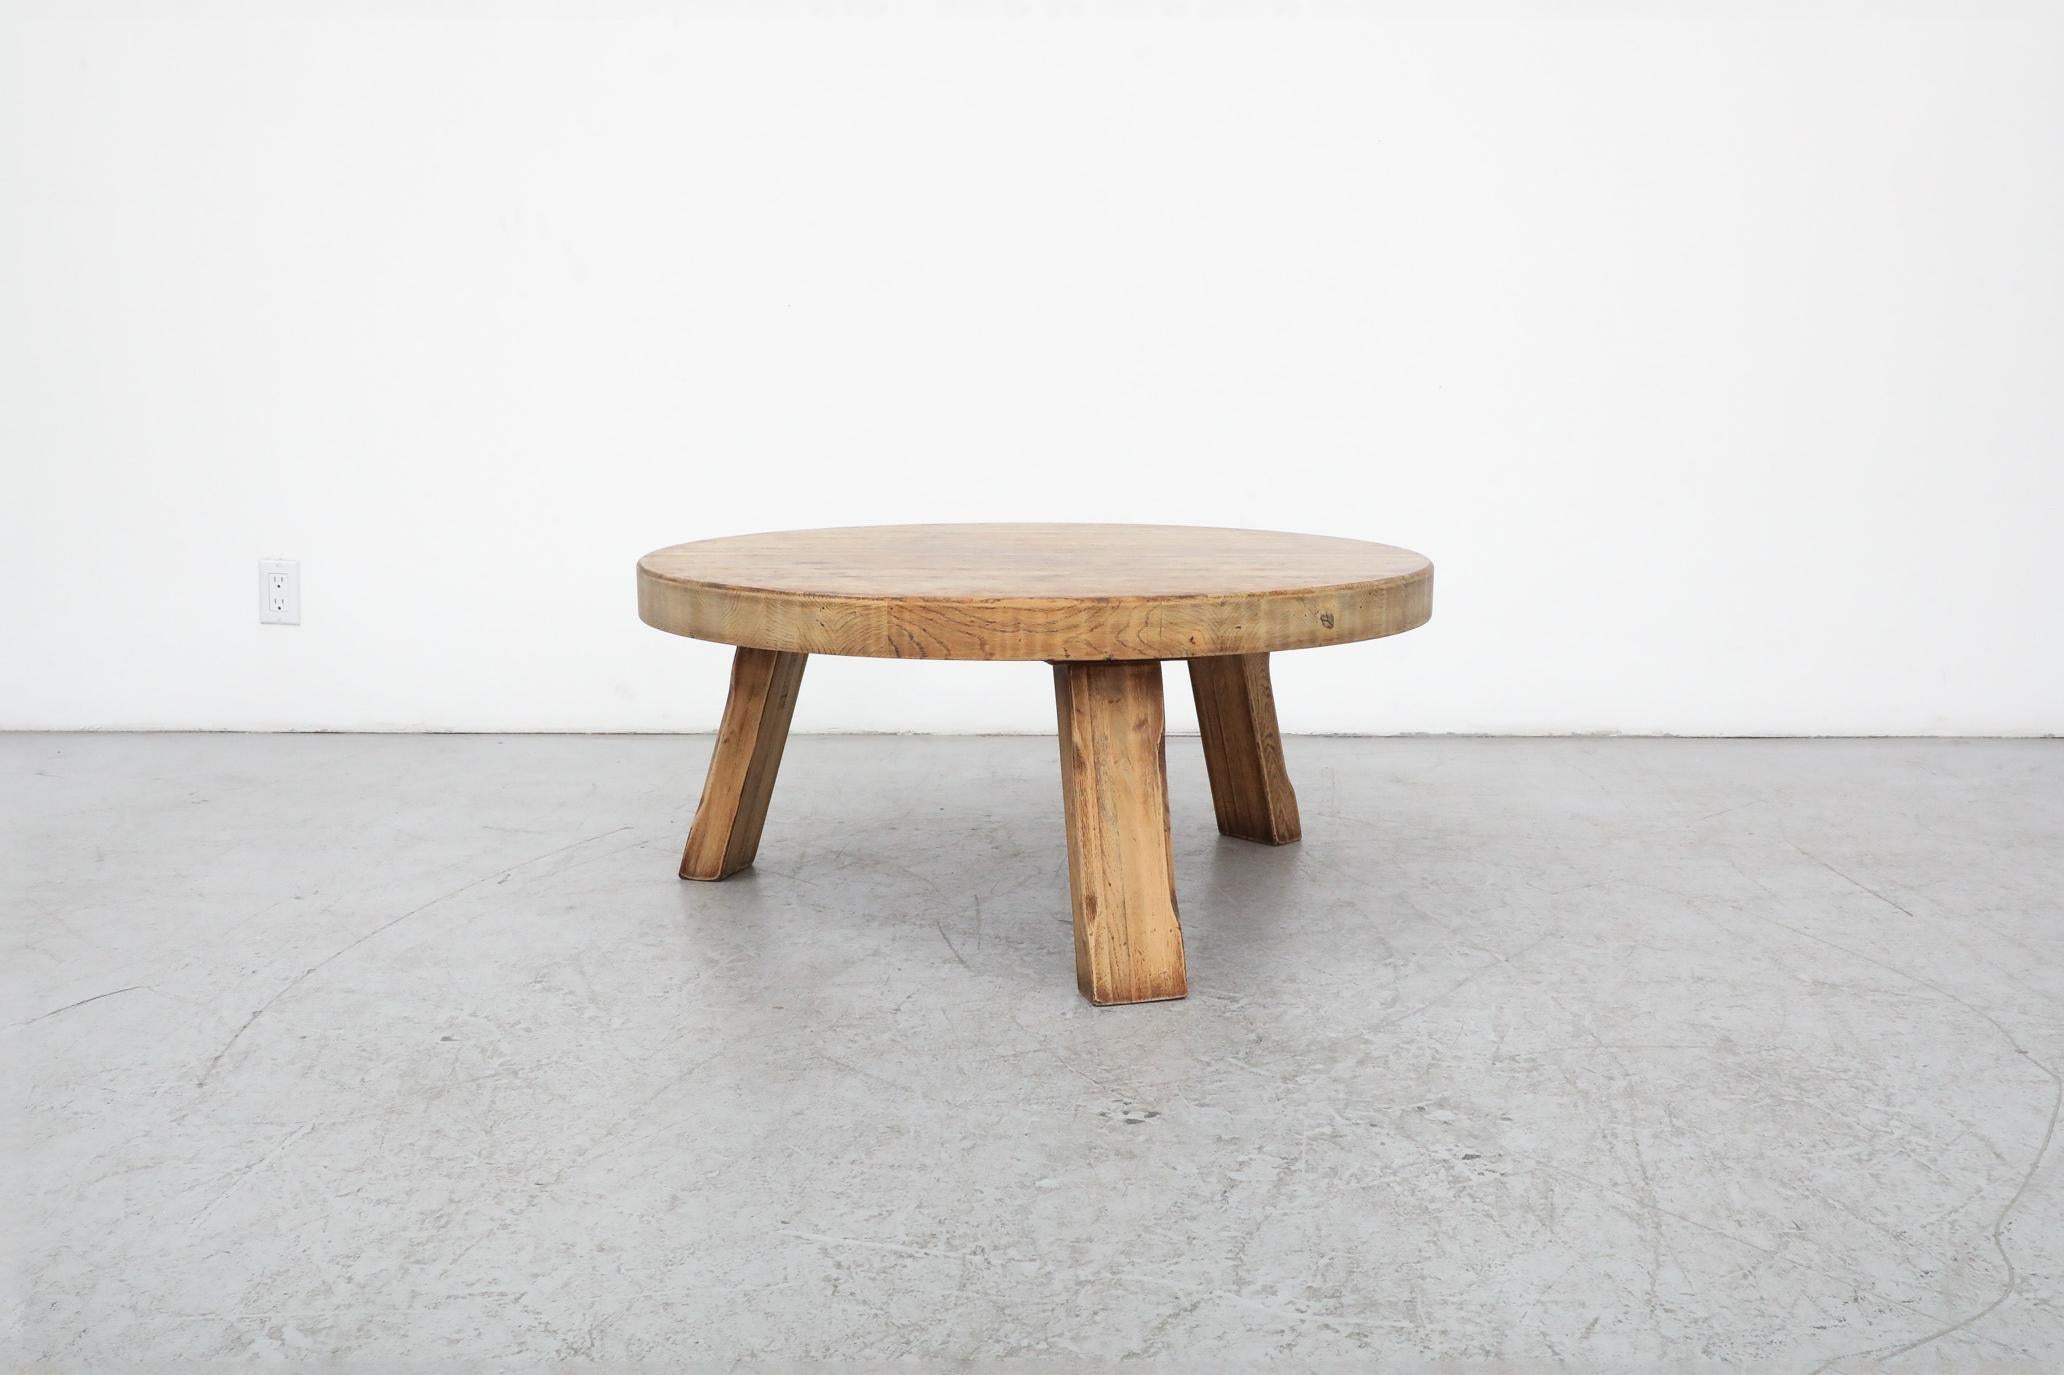 Round, Mid-Century Brutalist Pierre Chapo inspired coffee or side table made from solid wood with three sturdy square legs. In original condition with visible wear and patina consistent with its age and use. Other similar tables available and listed